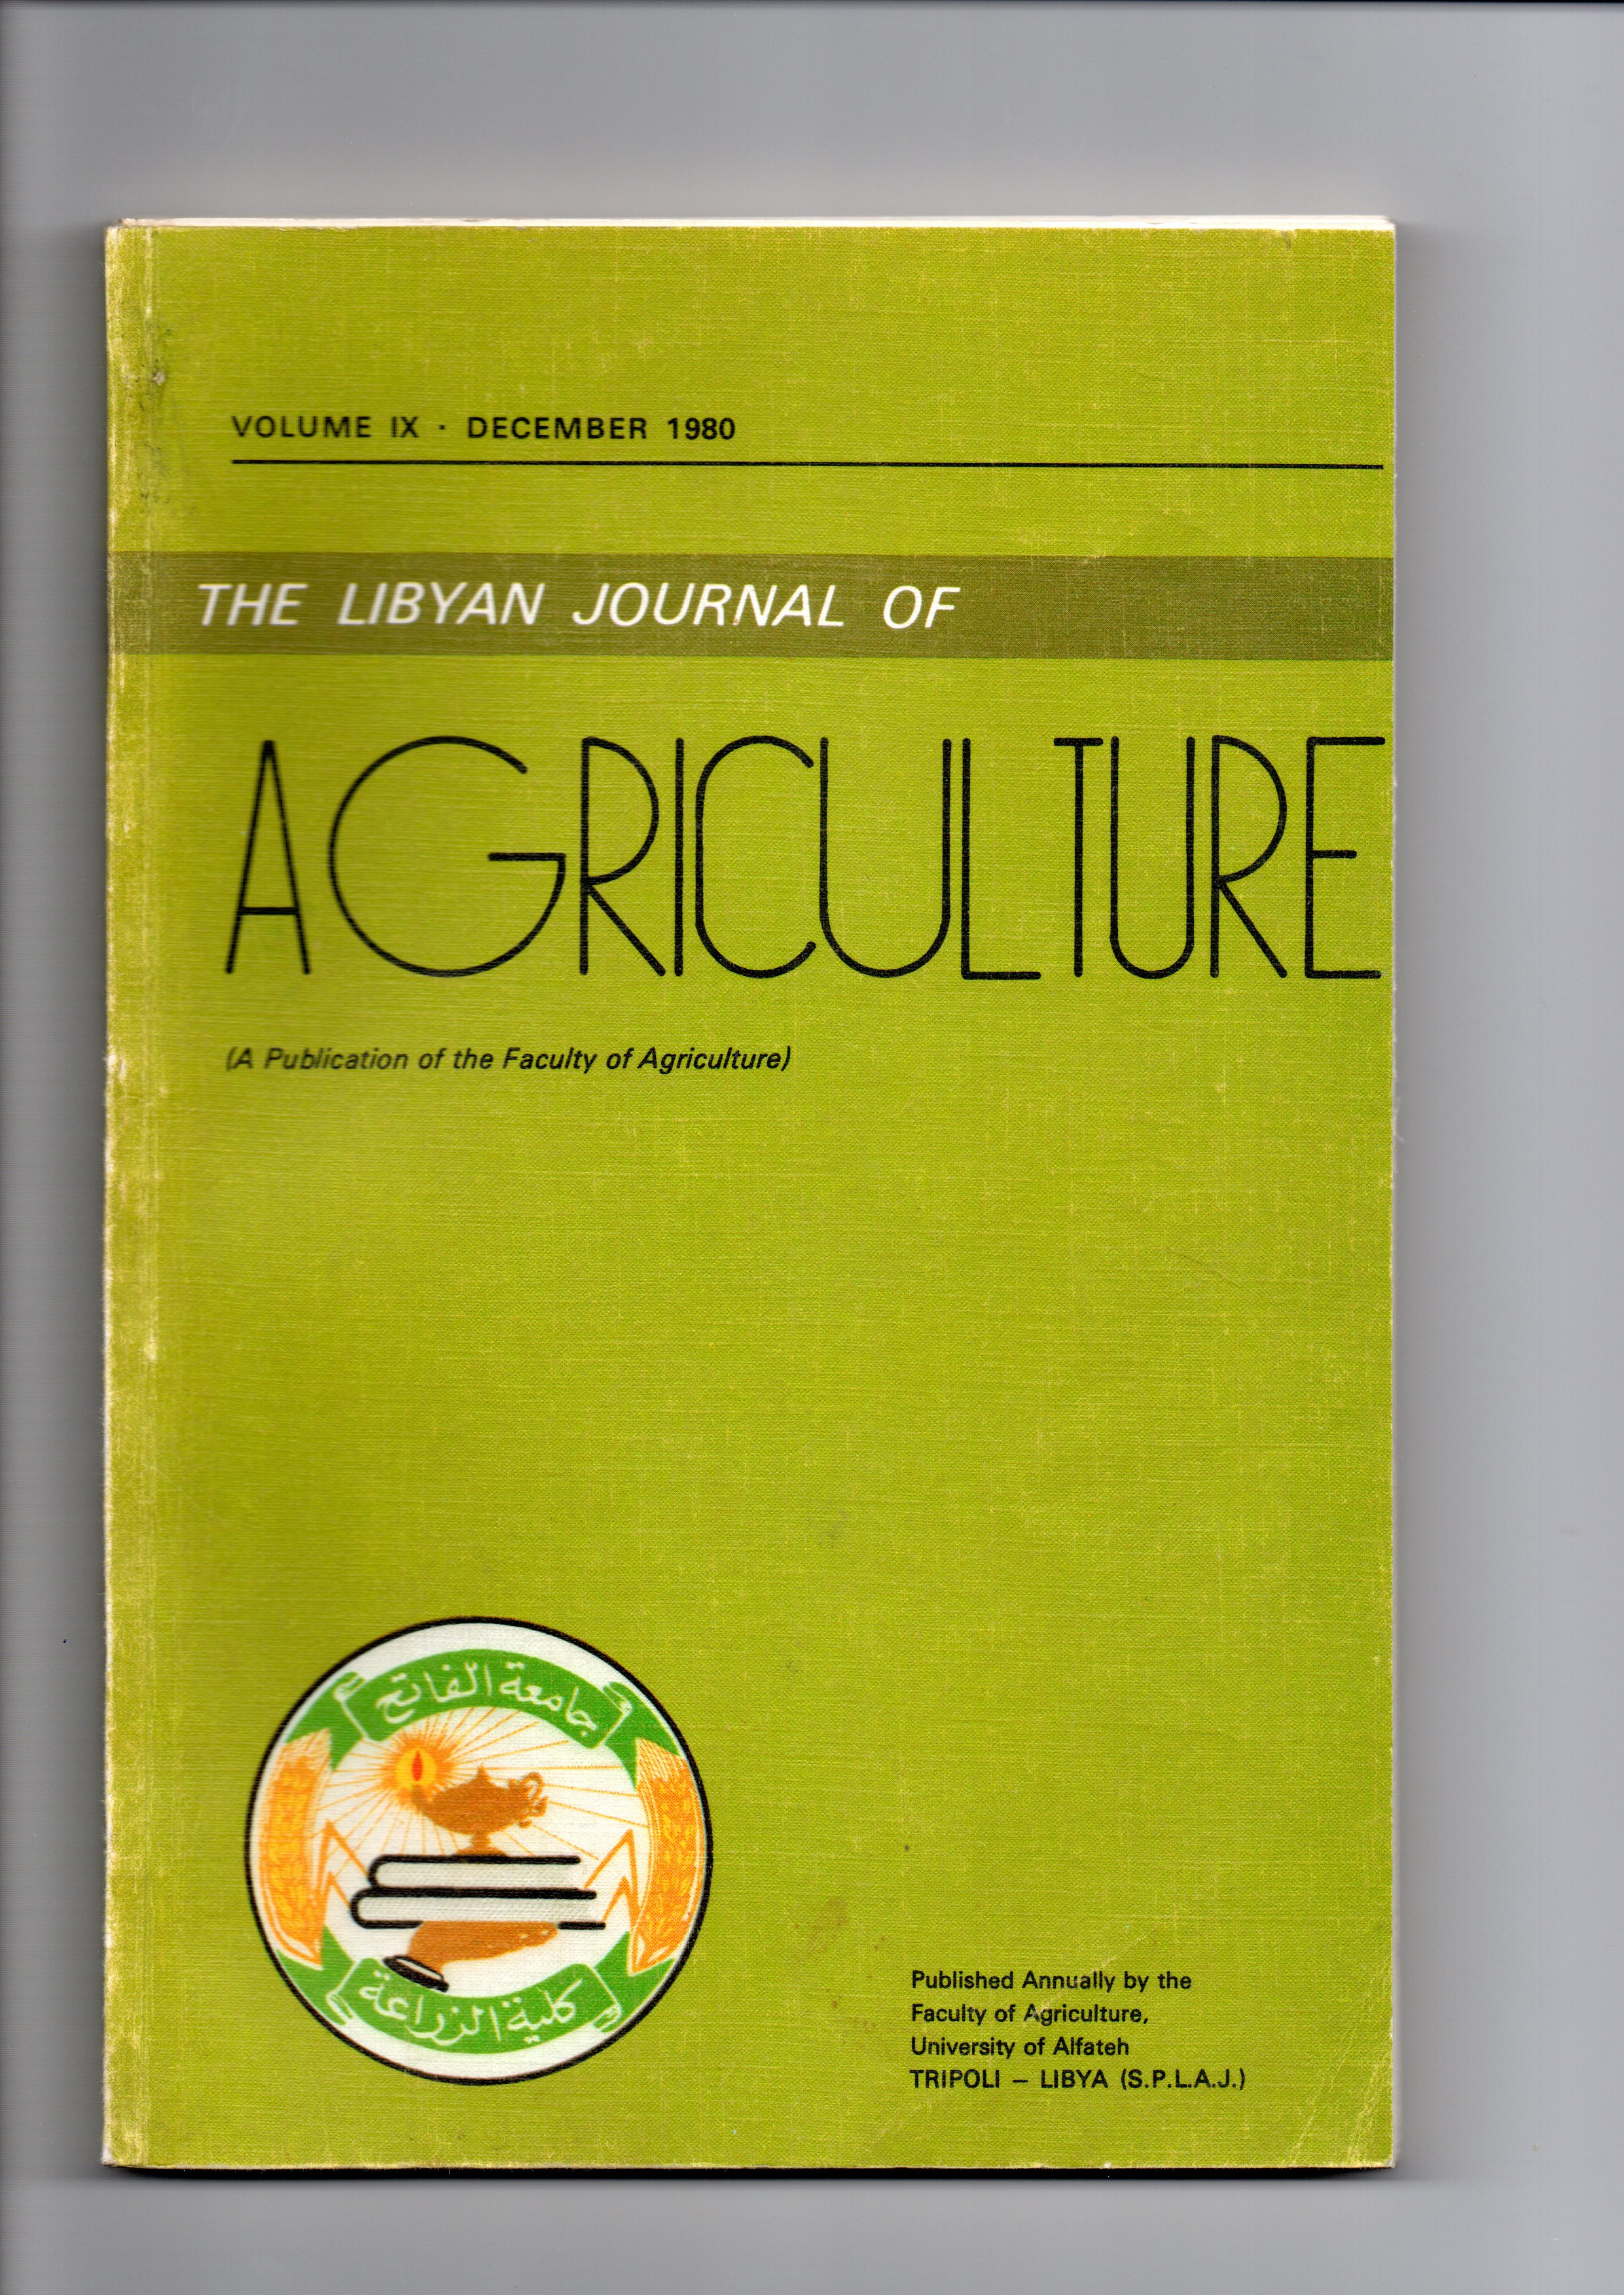 					View Vol. 9 No. 1 (1980): The Libyan Journal of Agriculture
				